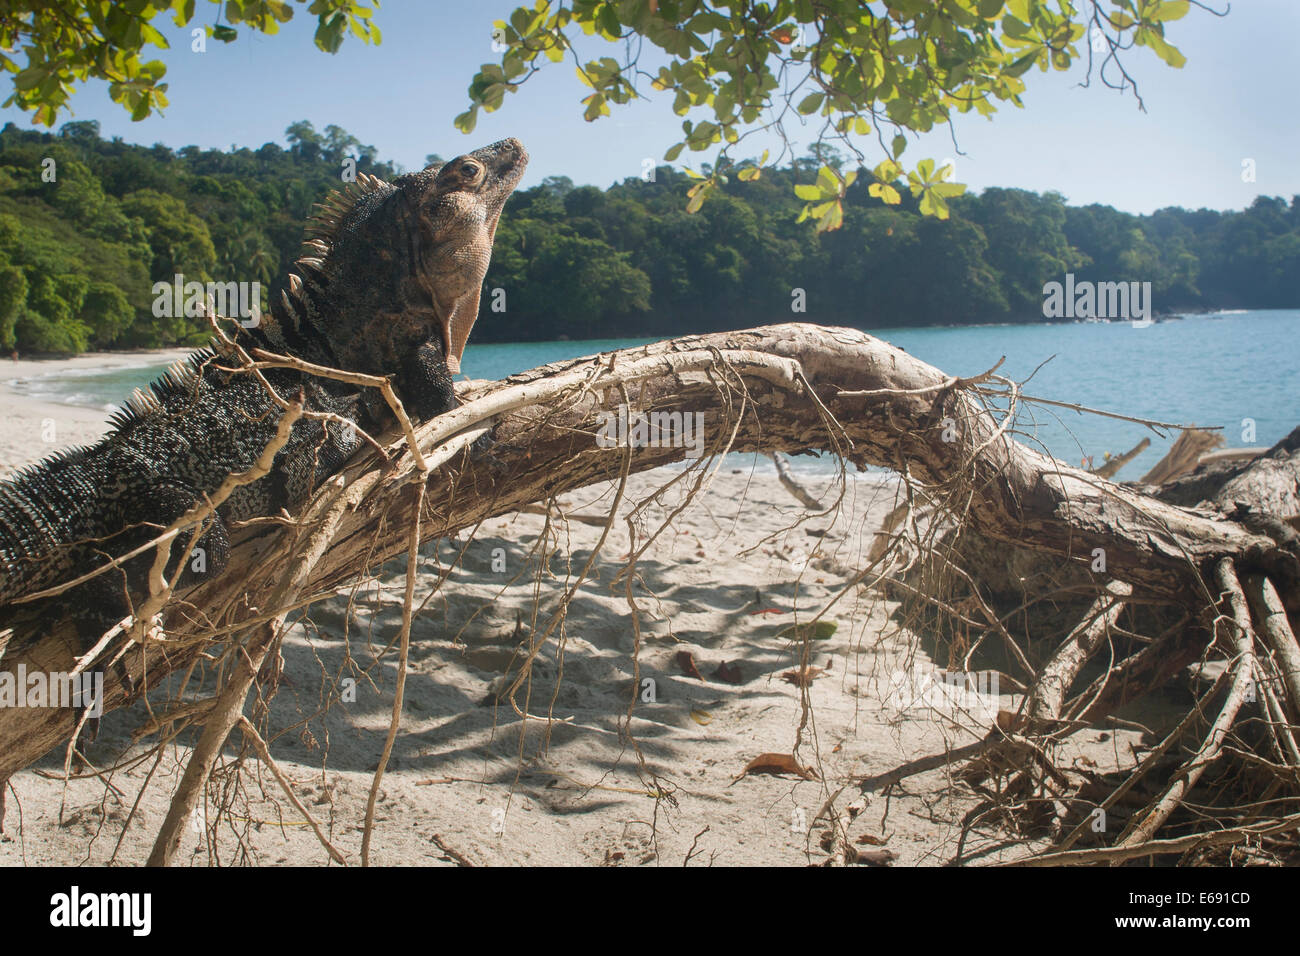 A magnificent male black spiny-tailed iguana (Ctenosaura similis) on the beach.  Photographed in Costa Rica. Stock Photo